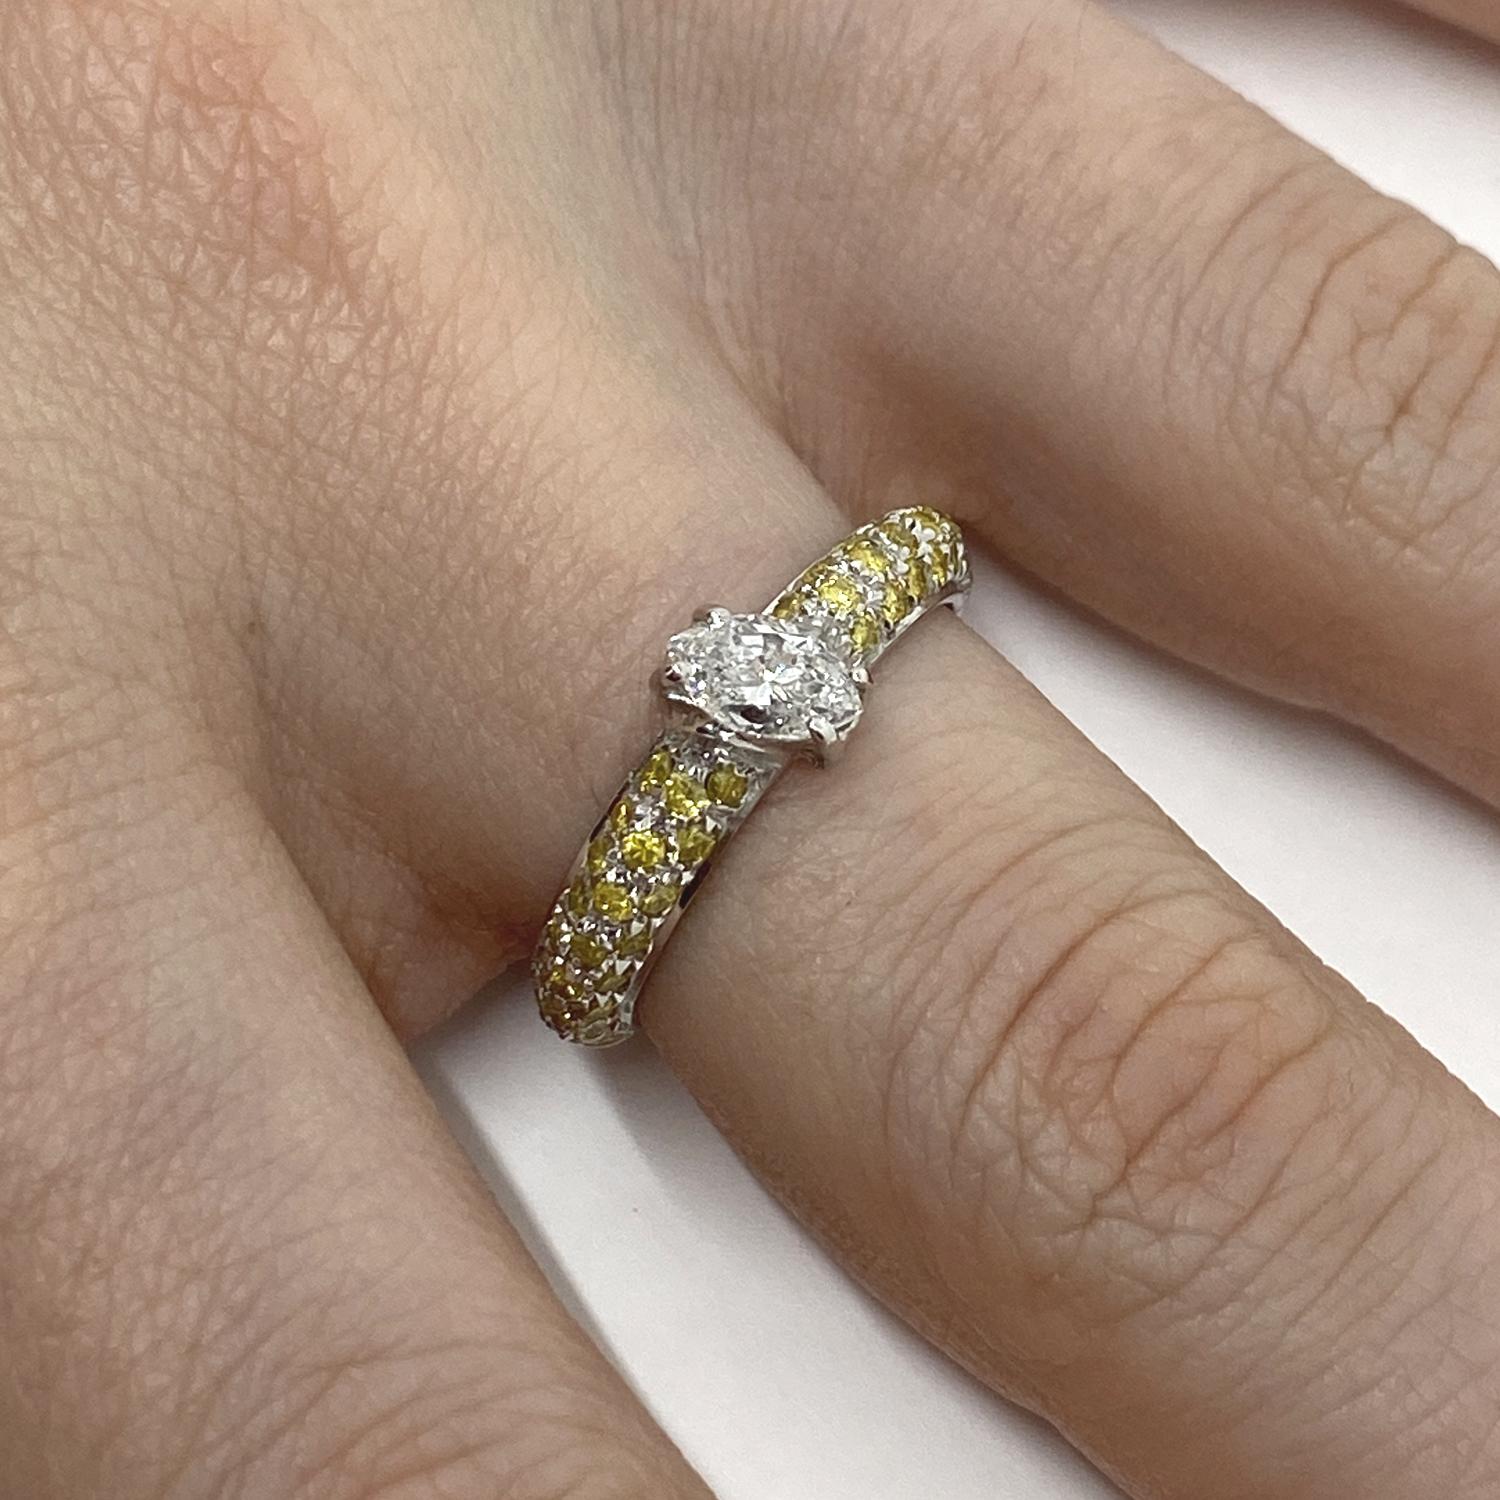 Ring made of 18kt white gold with natural white navette-cut diamond for ct.0.45 and pavé brilliant-cut yellow sapphires for ct.0.57

Welcome to our jewelry collection, where every piece tells a story of timeless elegance and unparalleled